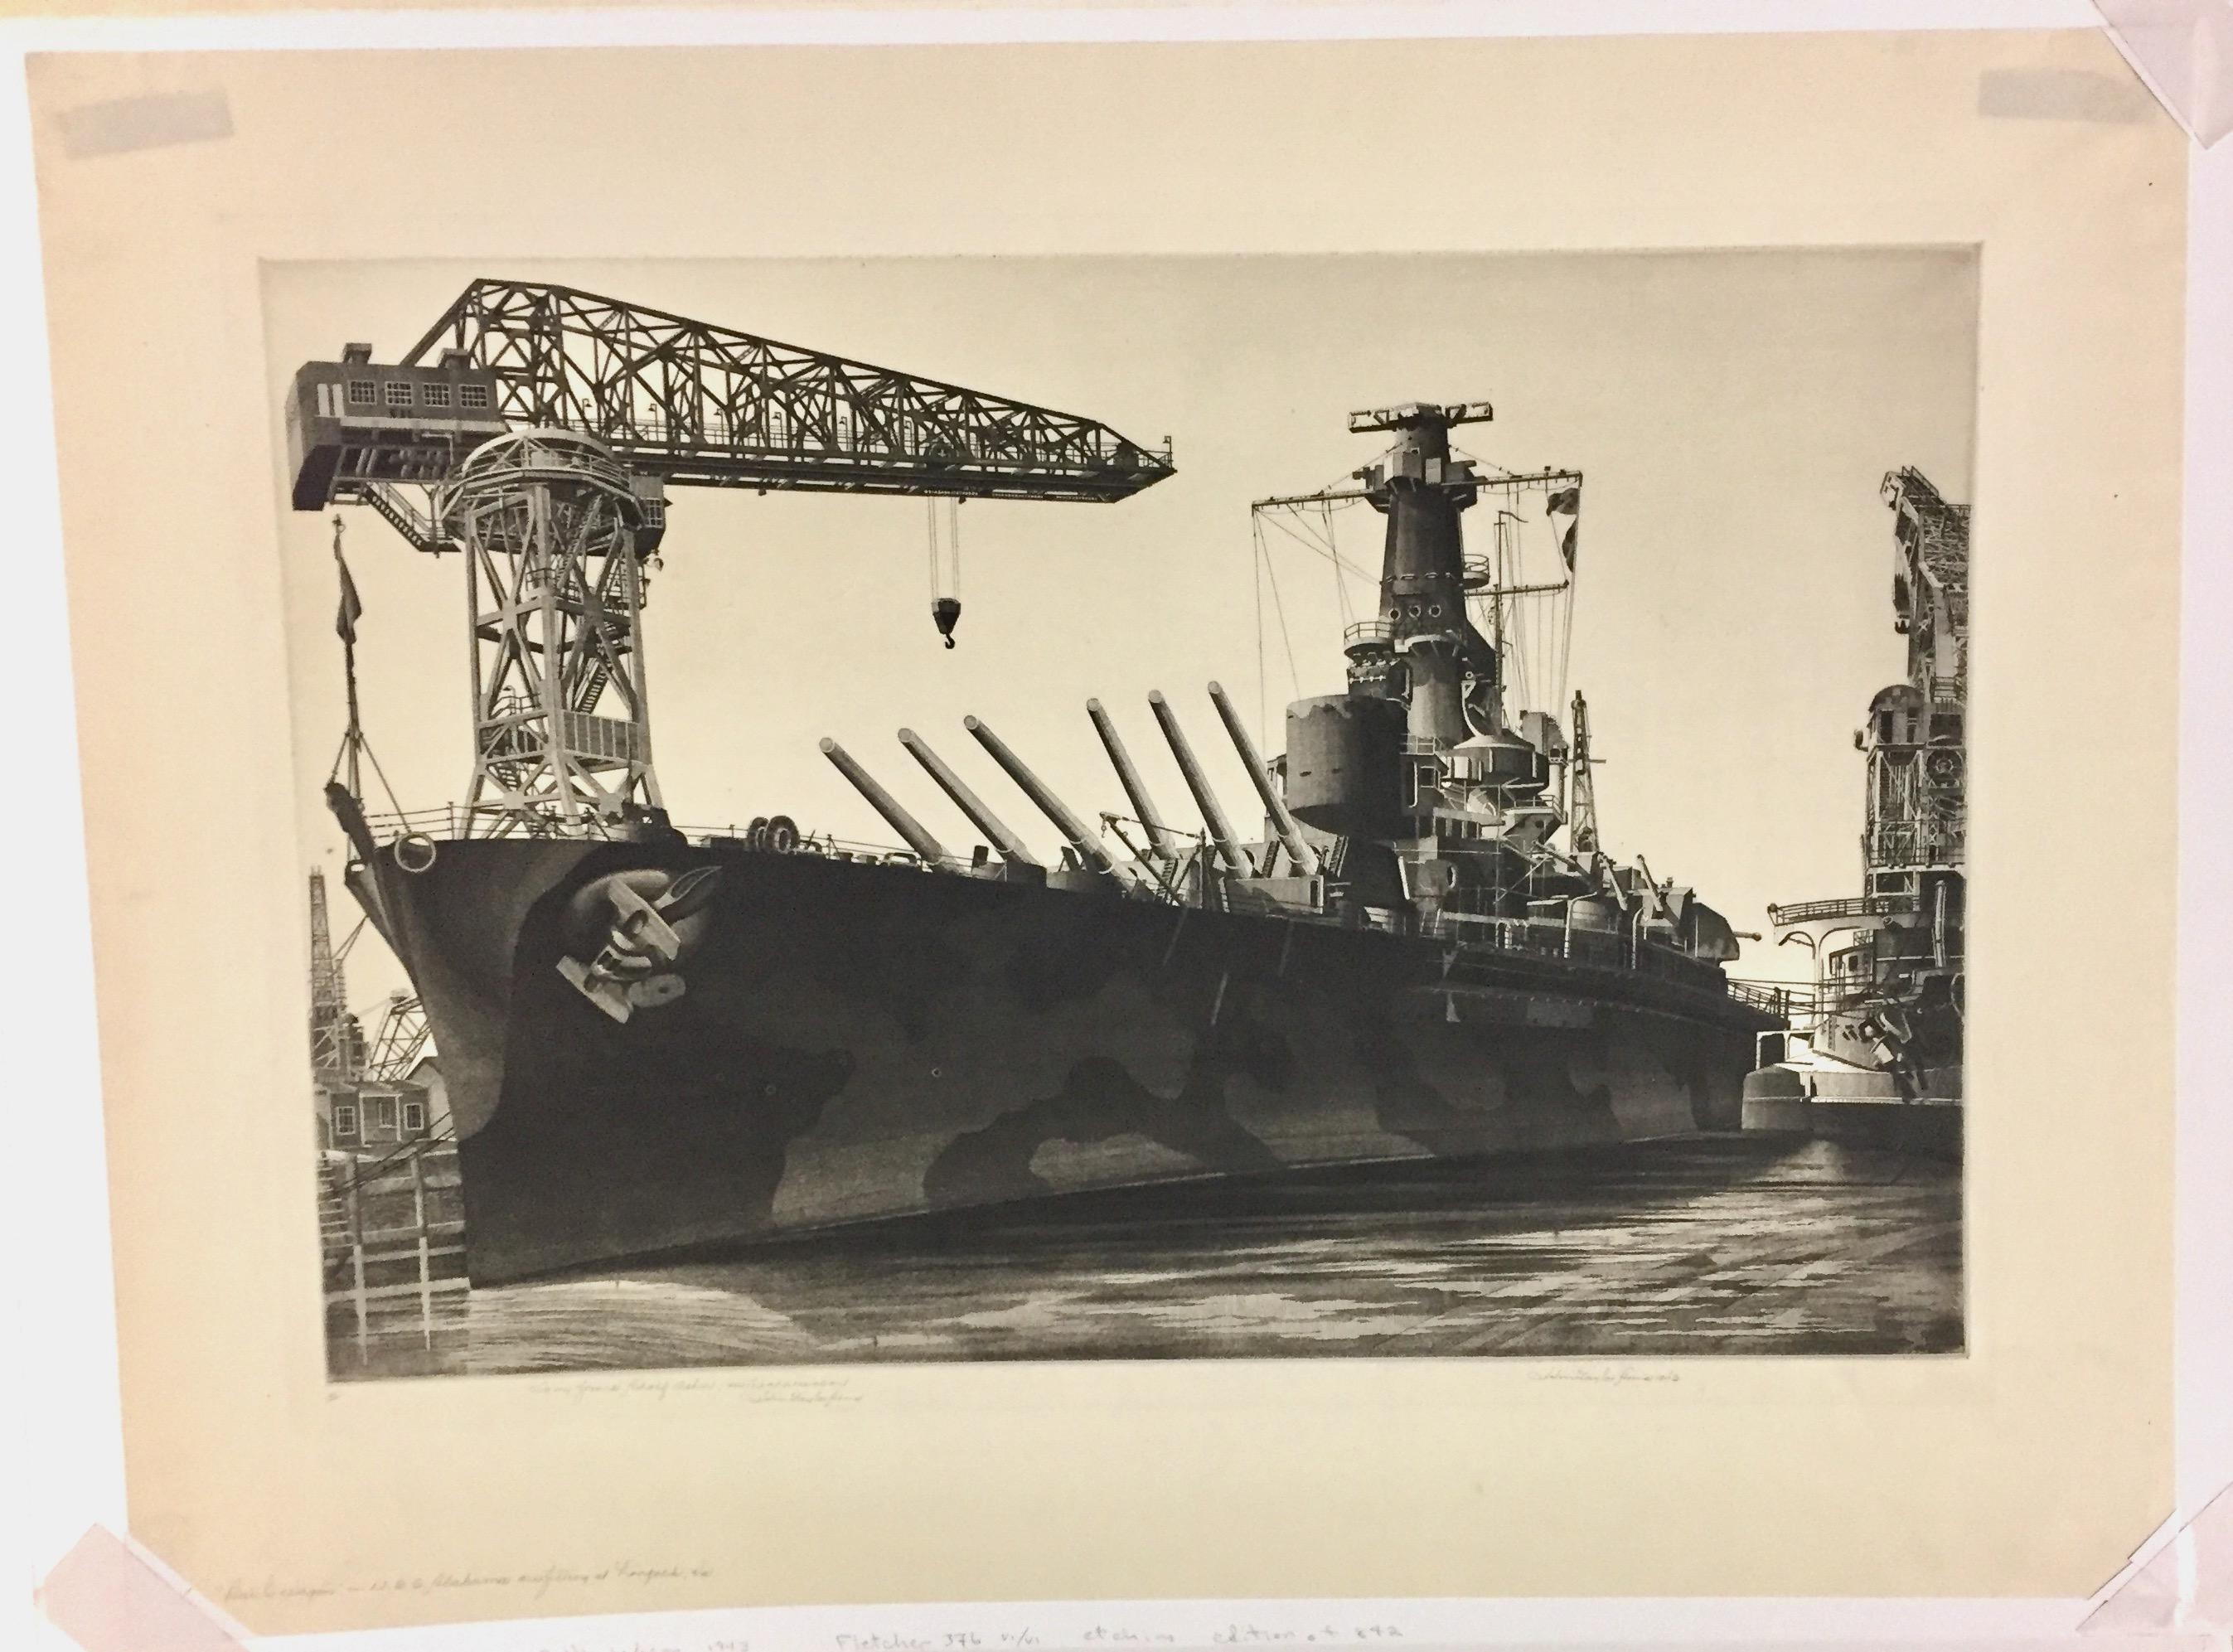 John Taylor Arms was known for making such finely drawn etchings that commercial tools were not good enough: He regularly used sewing needles with corks for handles. Made during World War II in 1943,  this is a view of the USS Alabama at Norfolk,